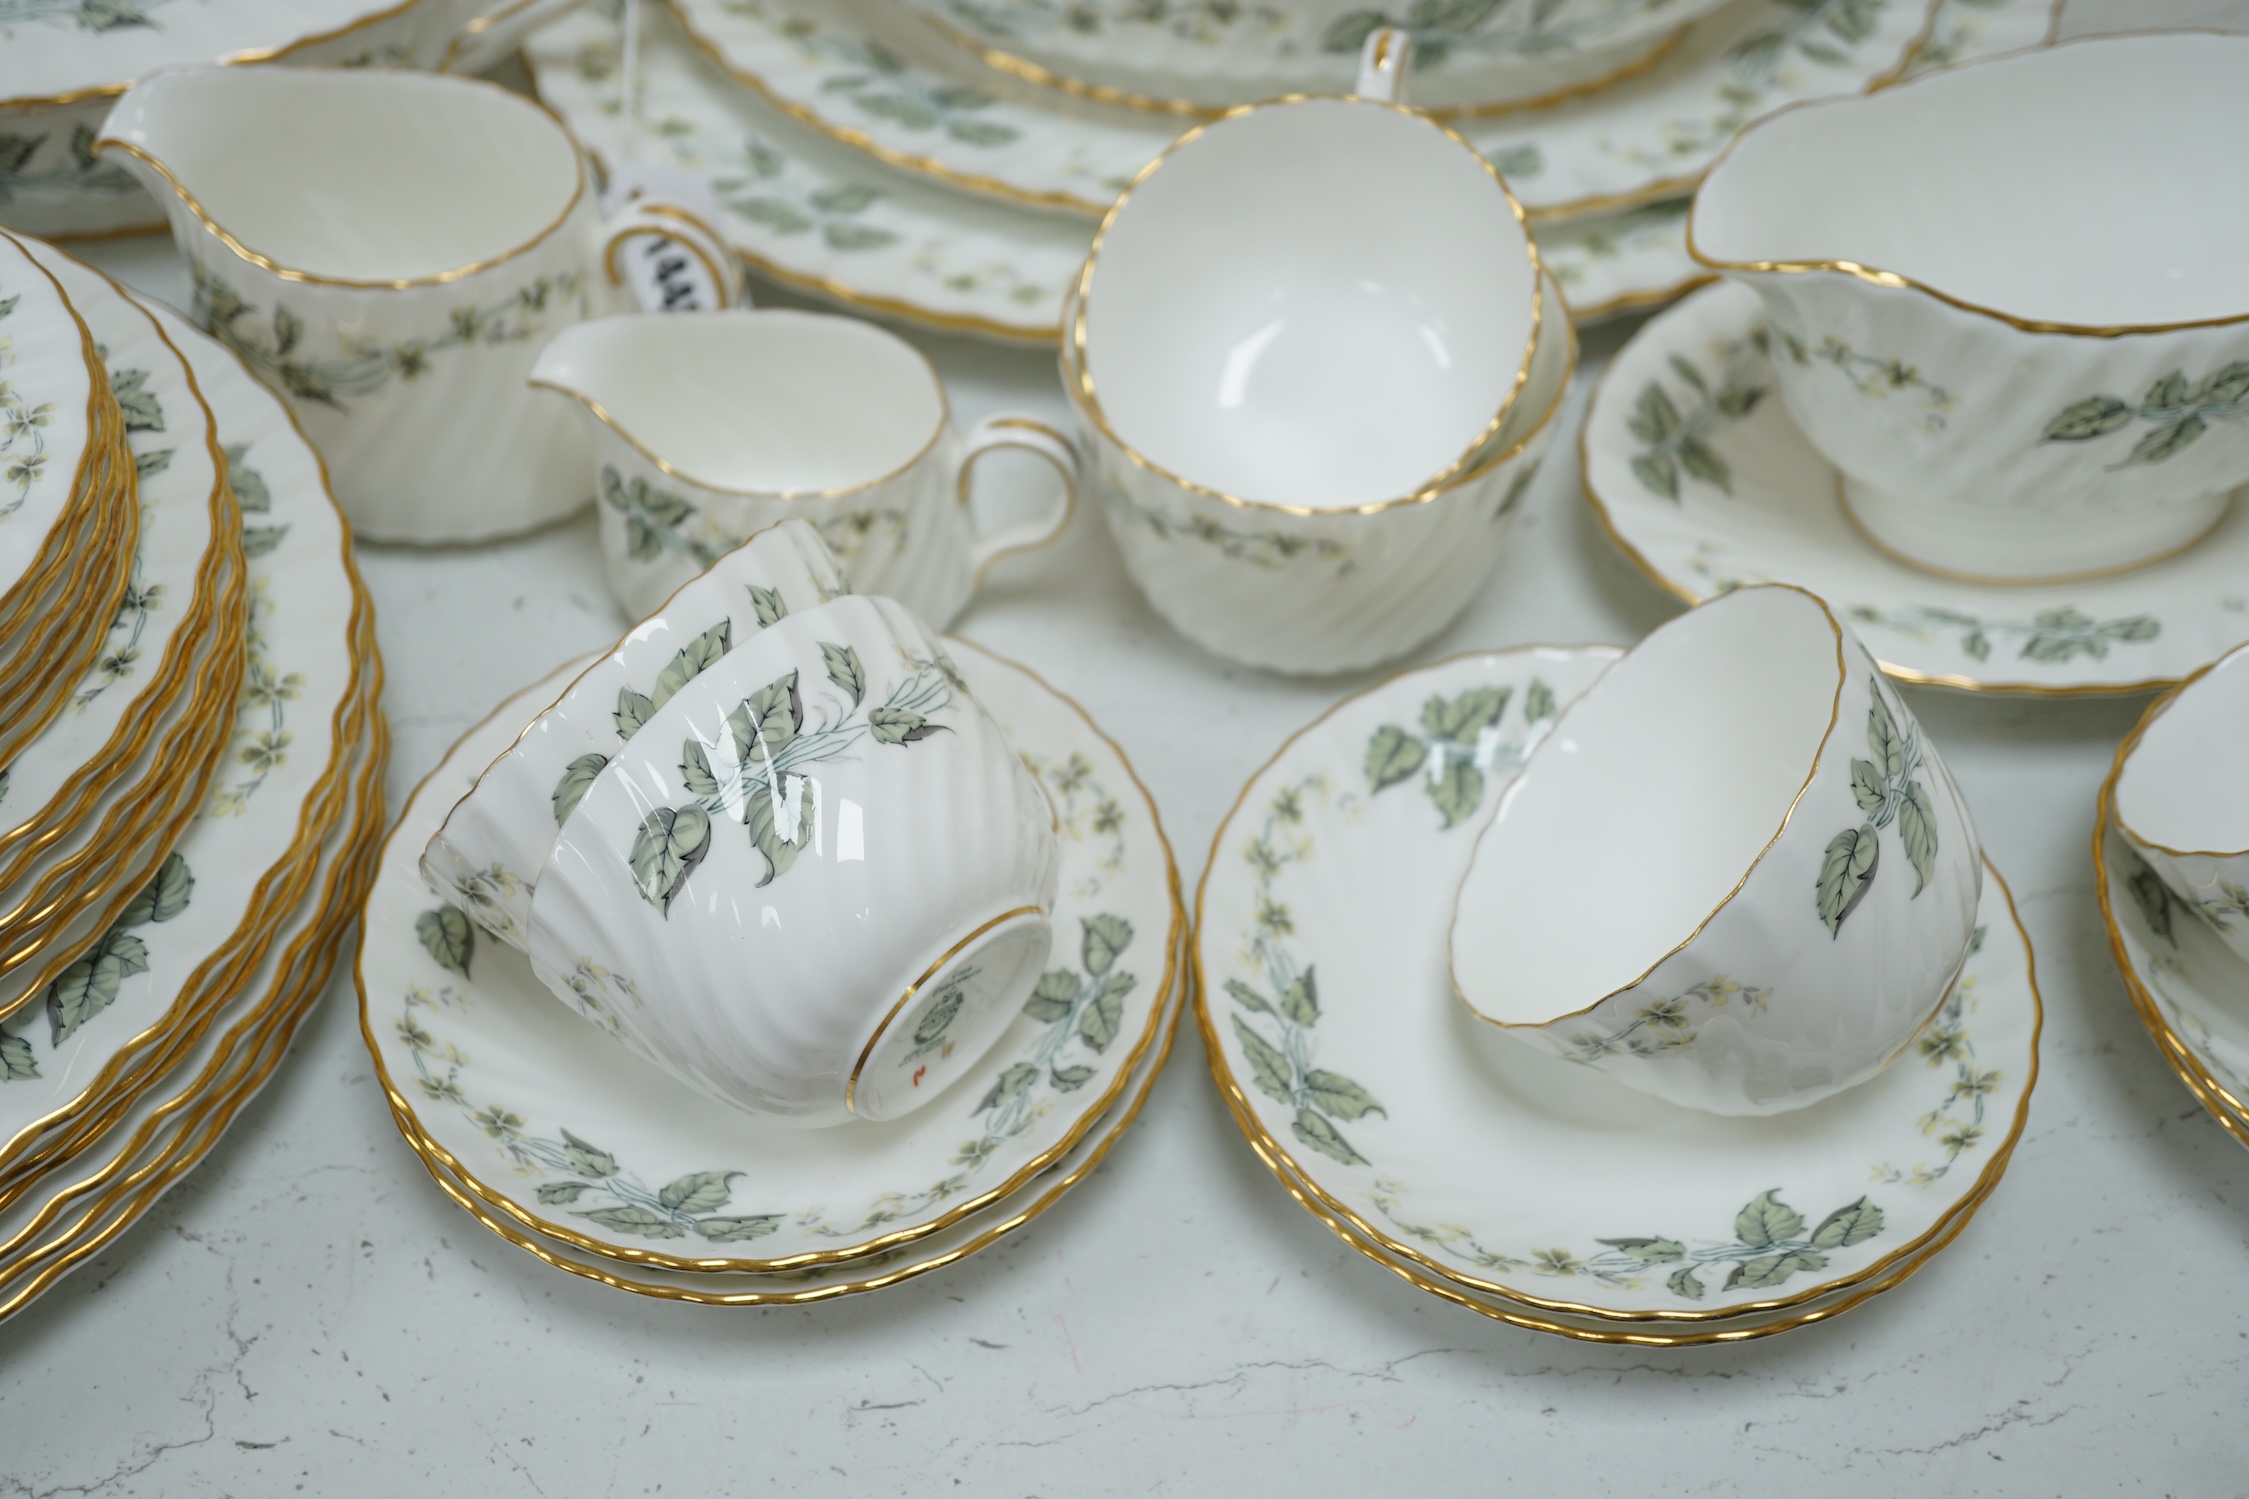 A Minton 'Greenwich pattern' bone china dinner and part tea service